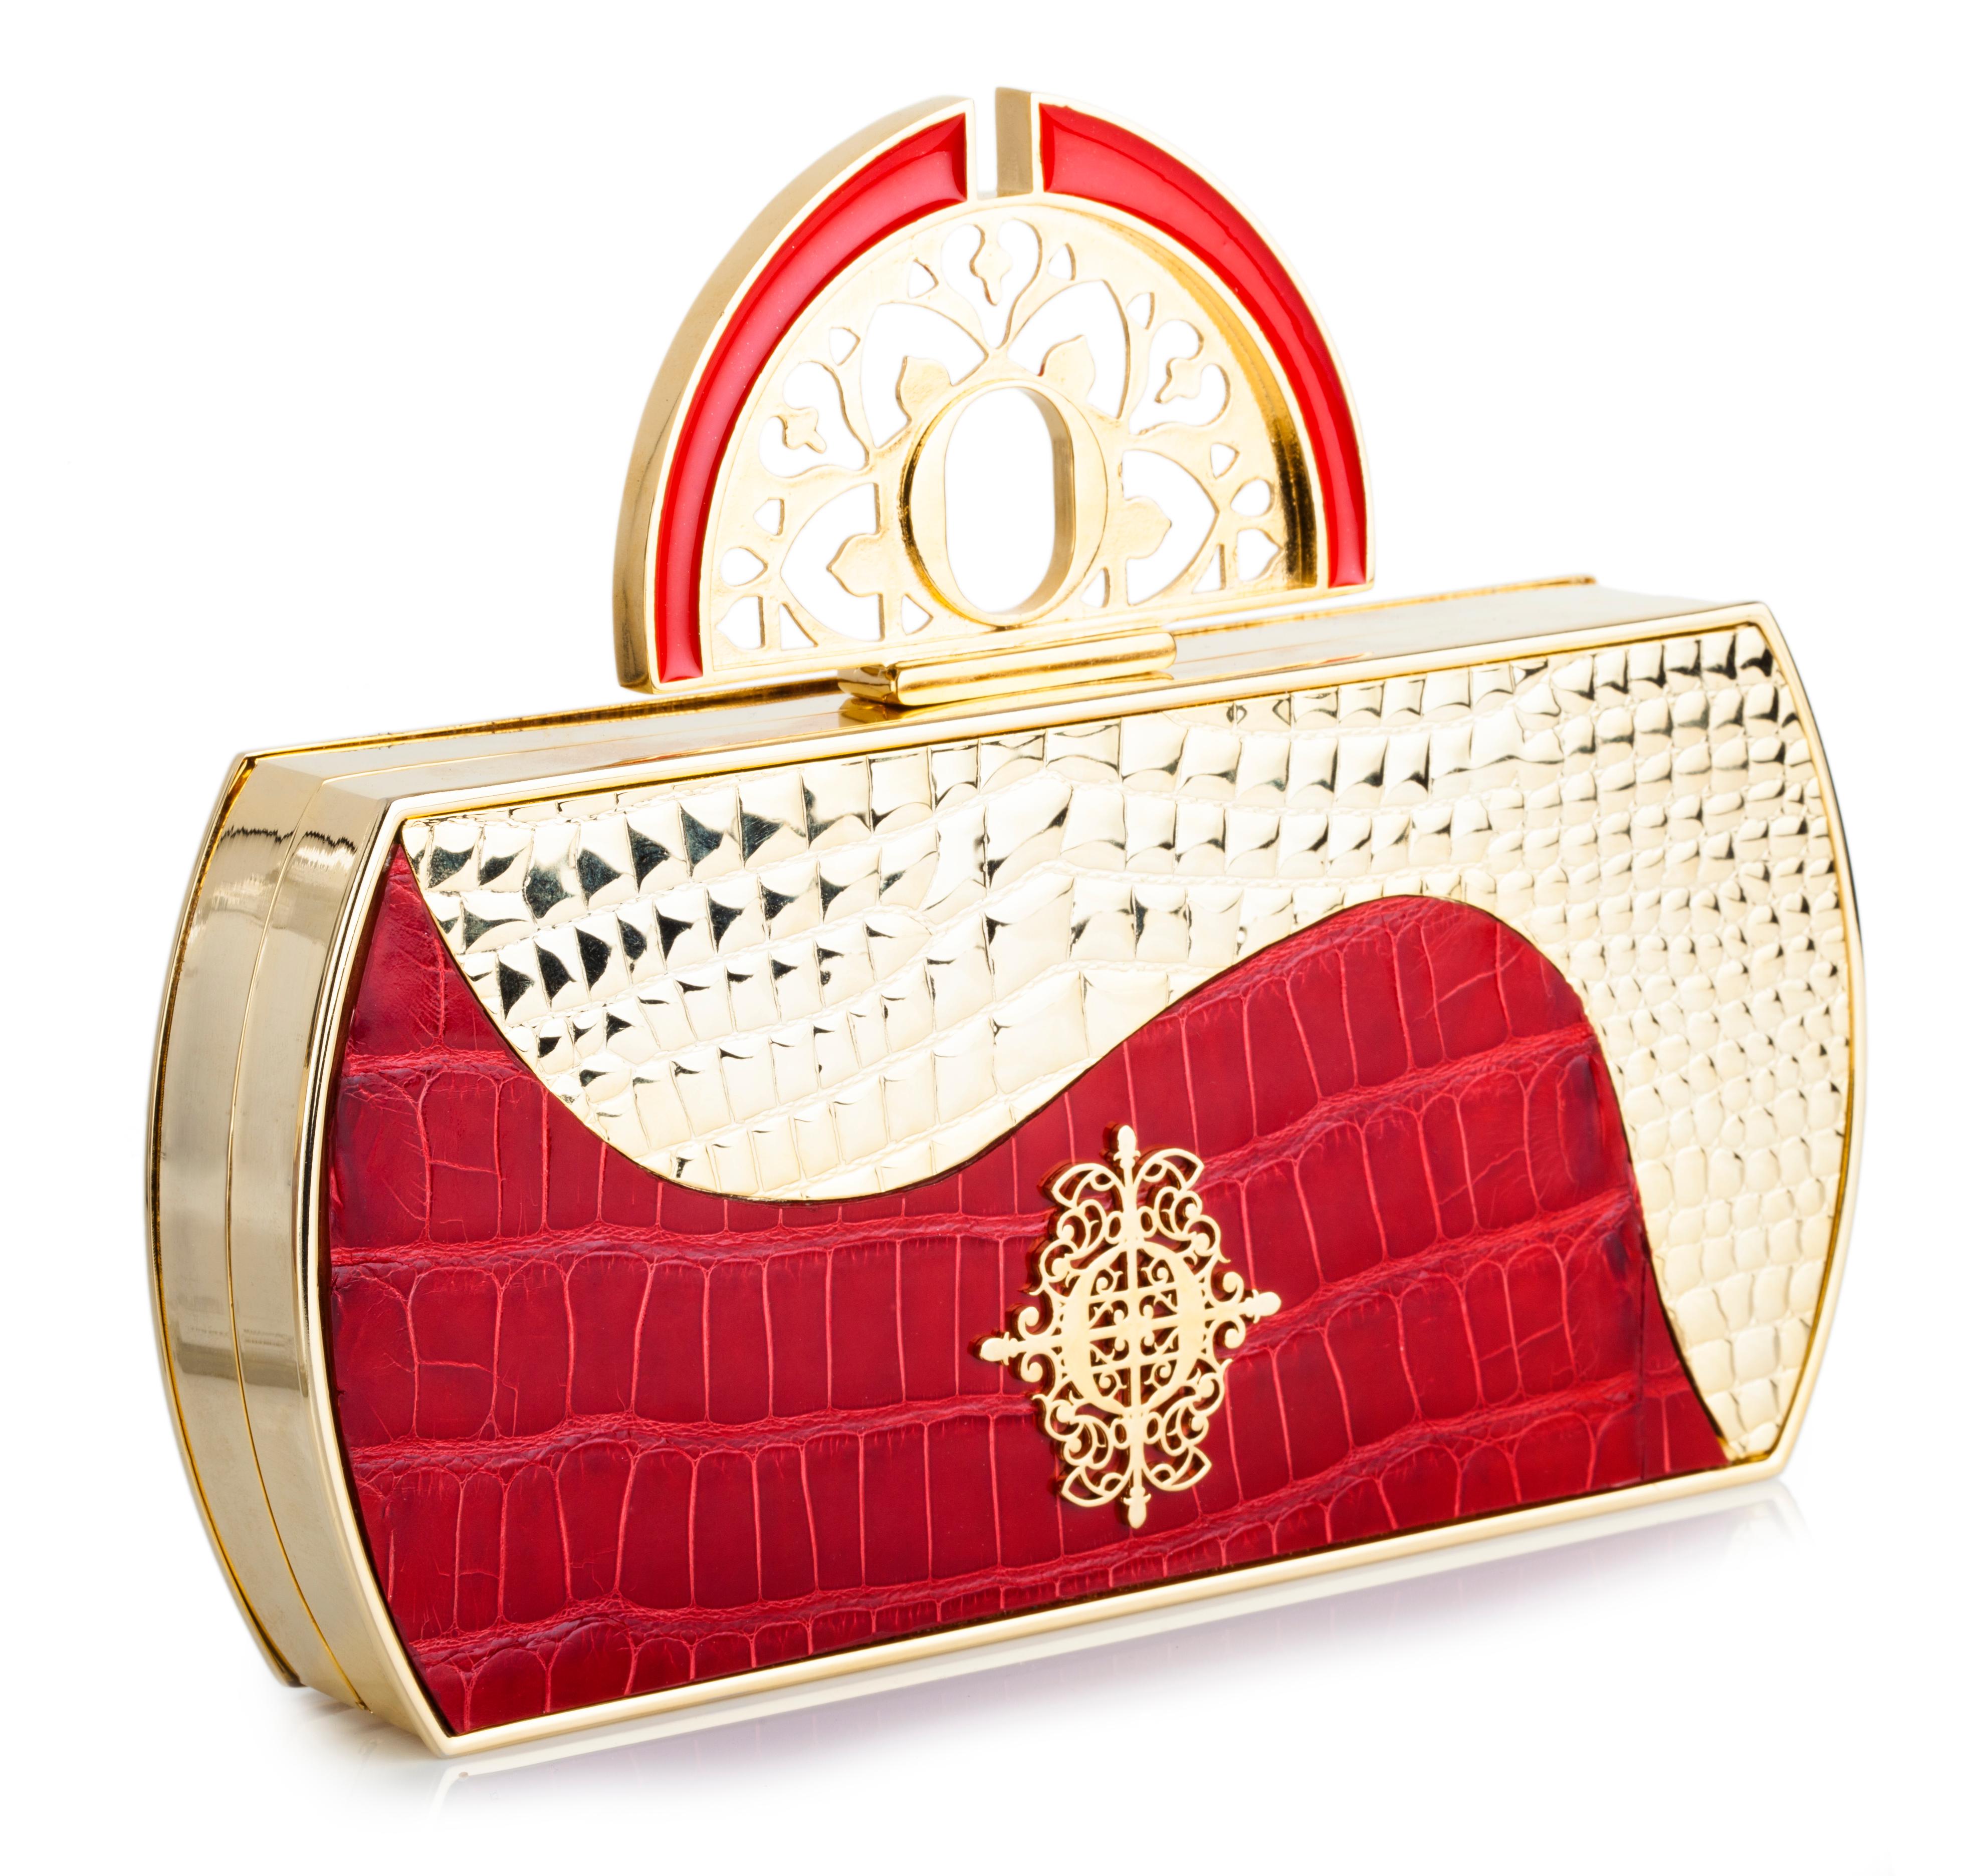 Bochic “Alicia” Limited Edition Jeweled Clutch For Sale 5